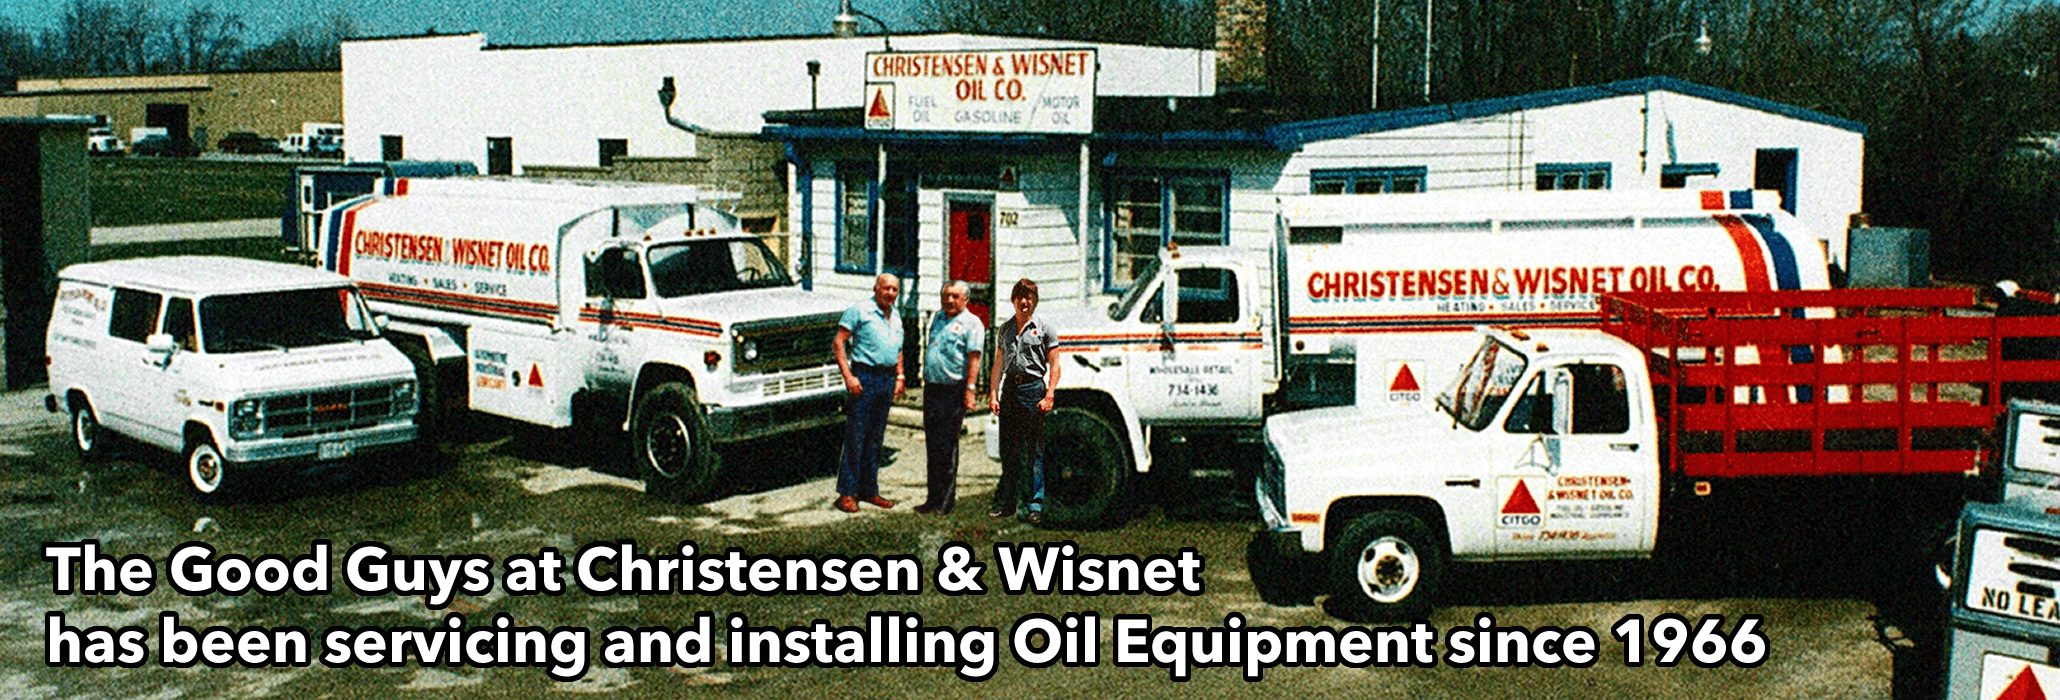 The Good Guys at Christensen & Wisnet (Oil Company) has been servicing and installing Oil Equipment since 1966!